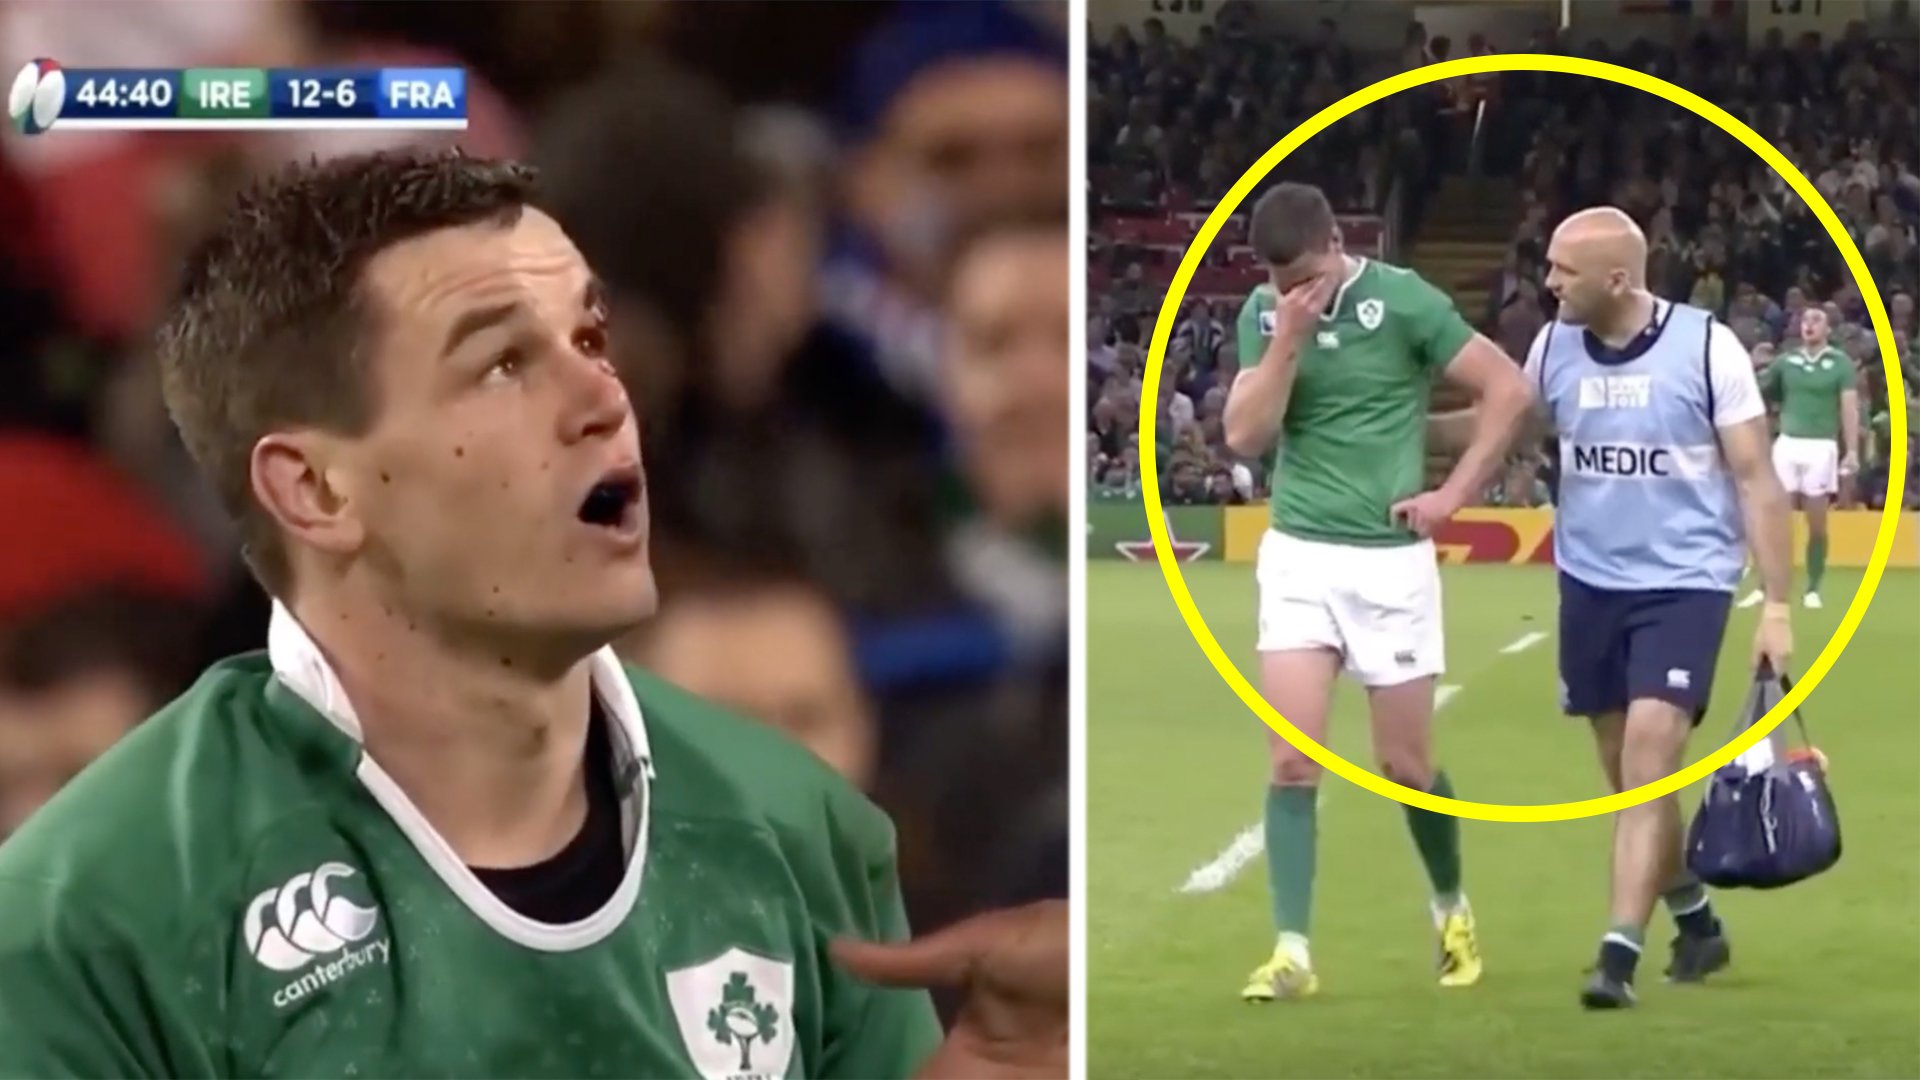 A compilation of all the times Johnny Sexton has stayed down injured has been made and it's quite revealing